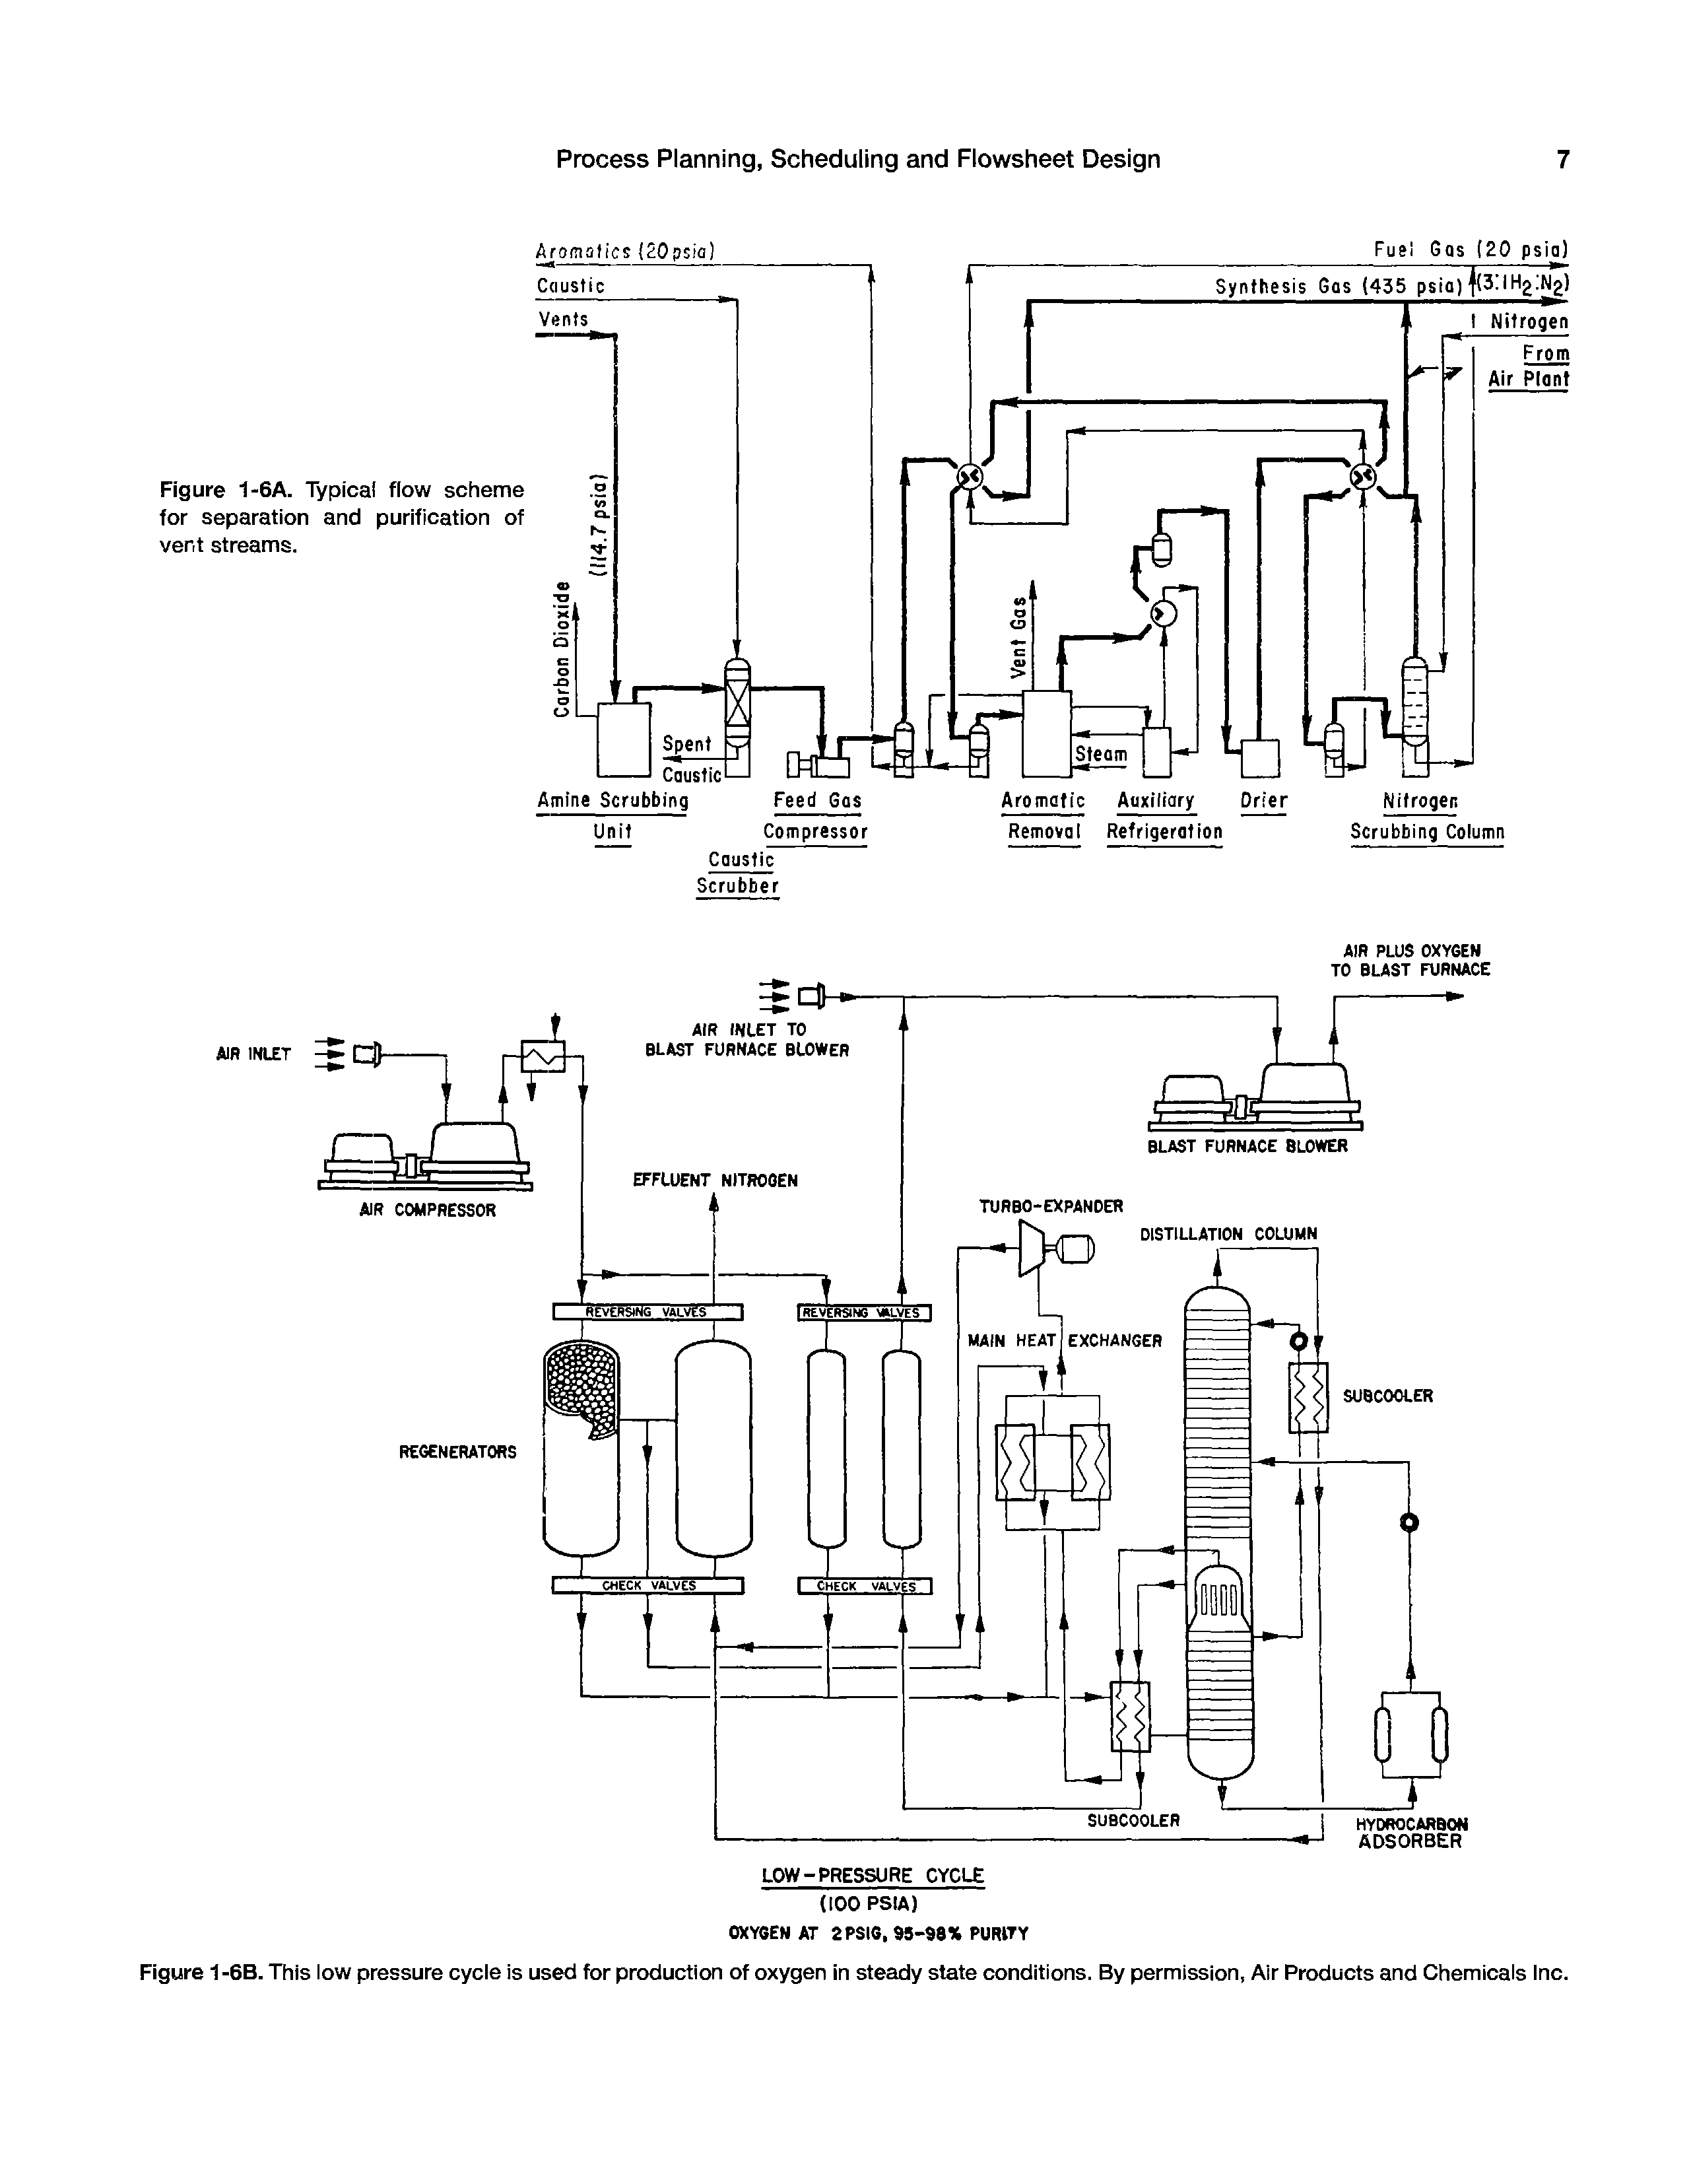 Figure 1-6A. Typical flow scheme for separation and purification of vent streams.